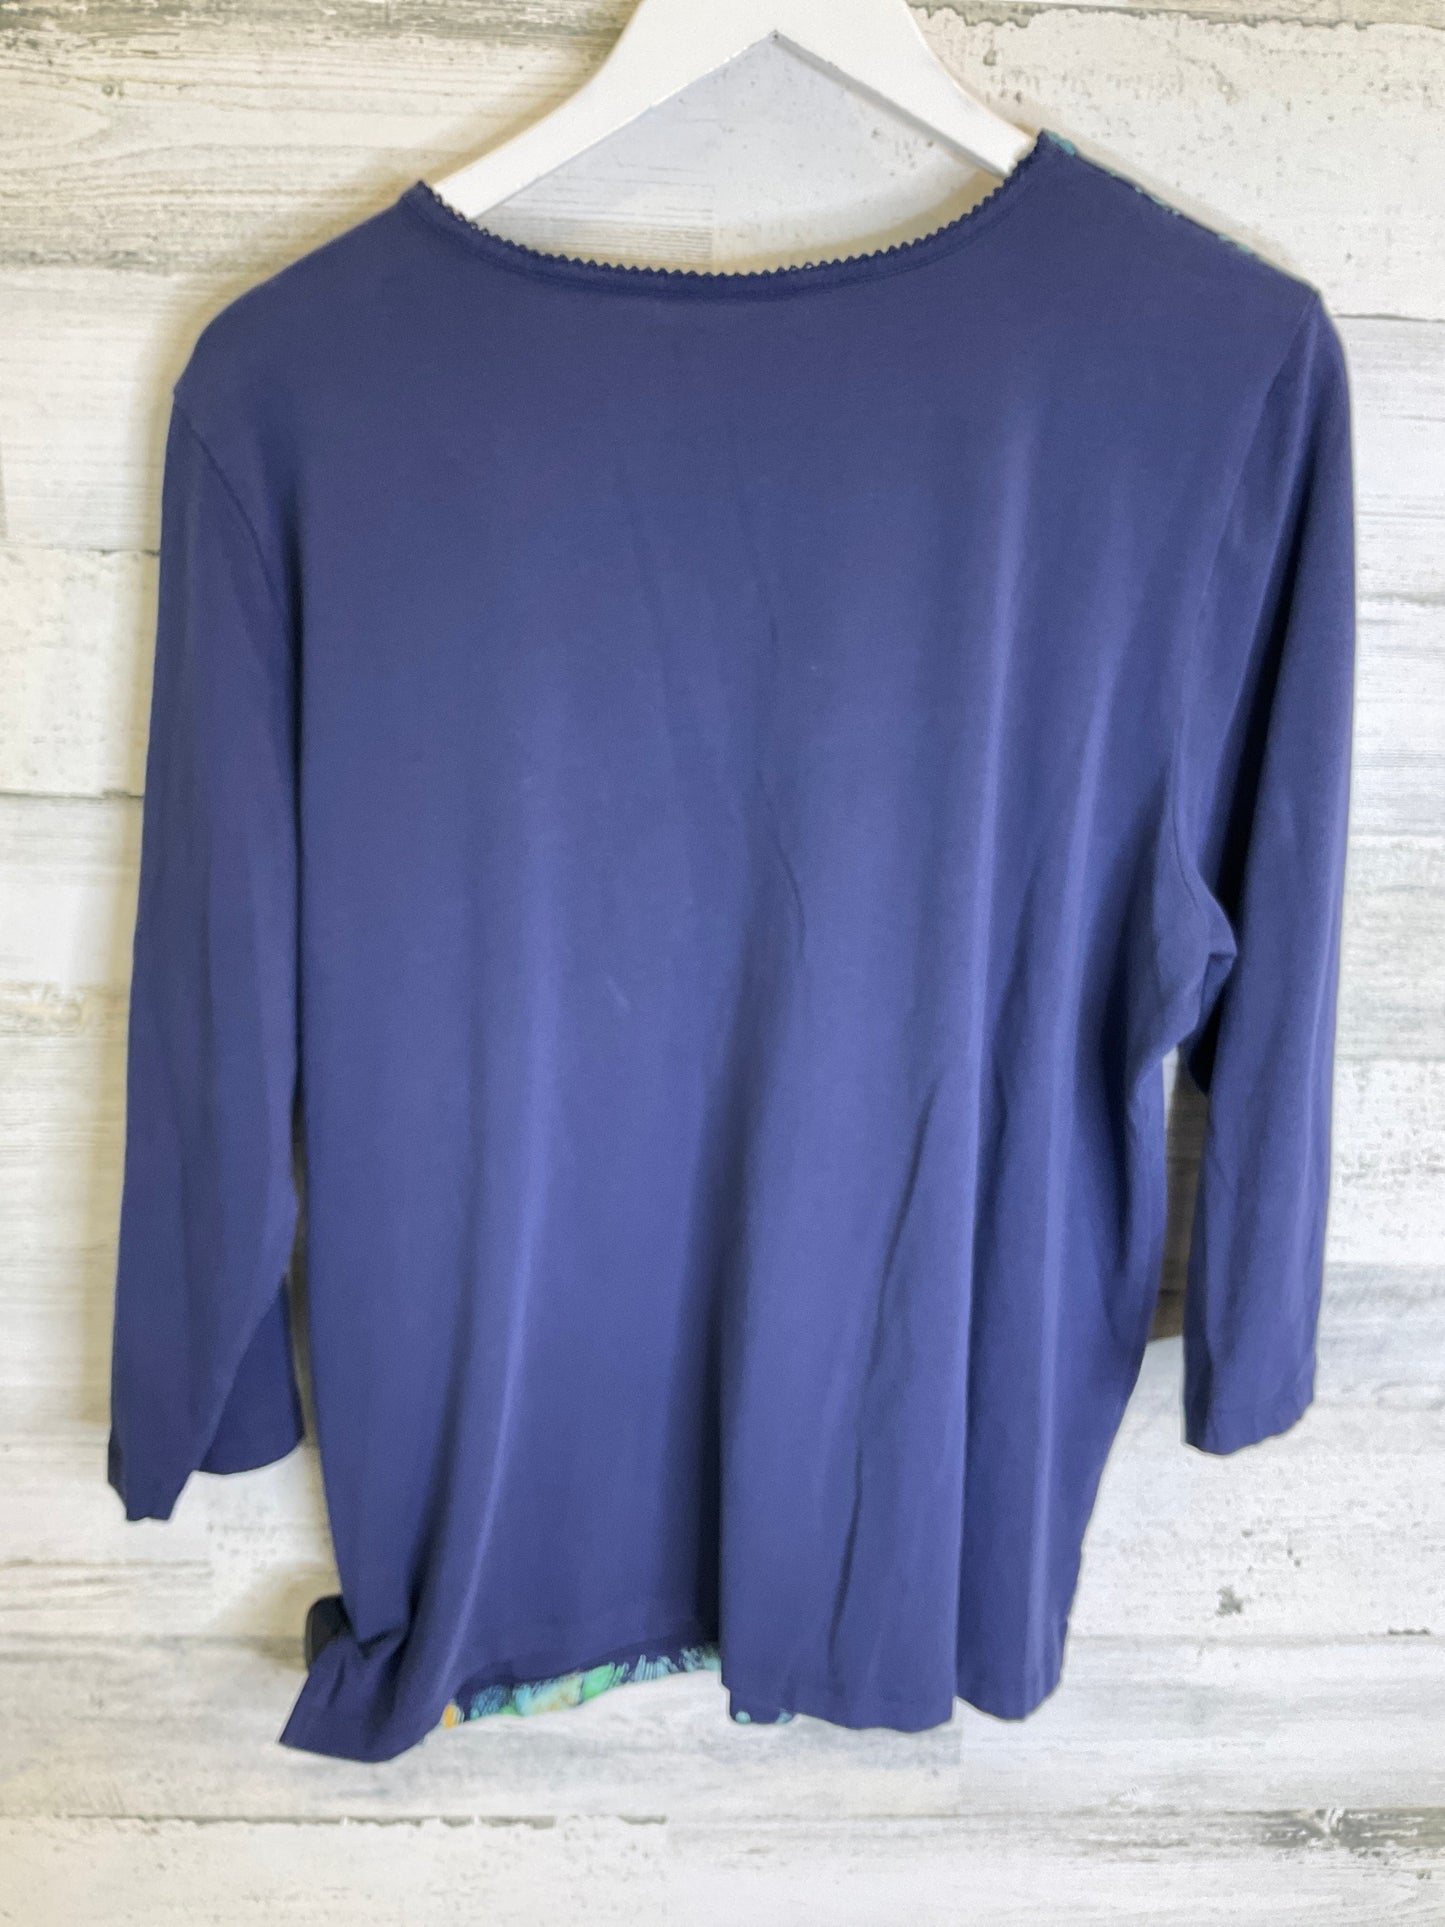 Blue Top 3/4 Sleeve Alfred Dunner, Size Xl